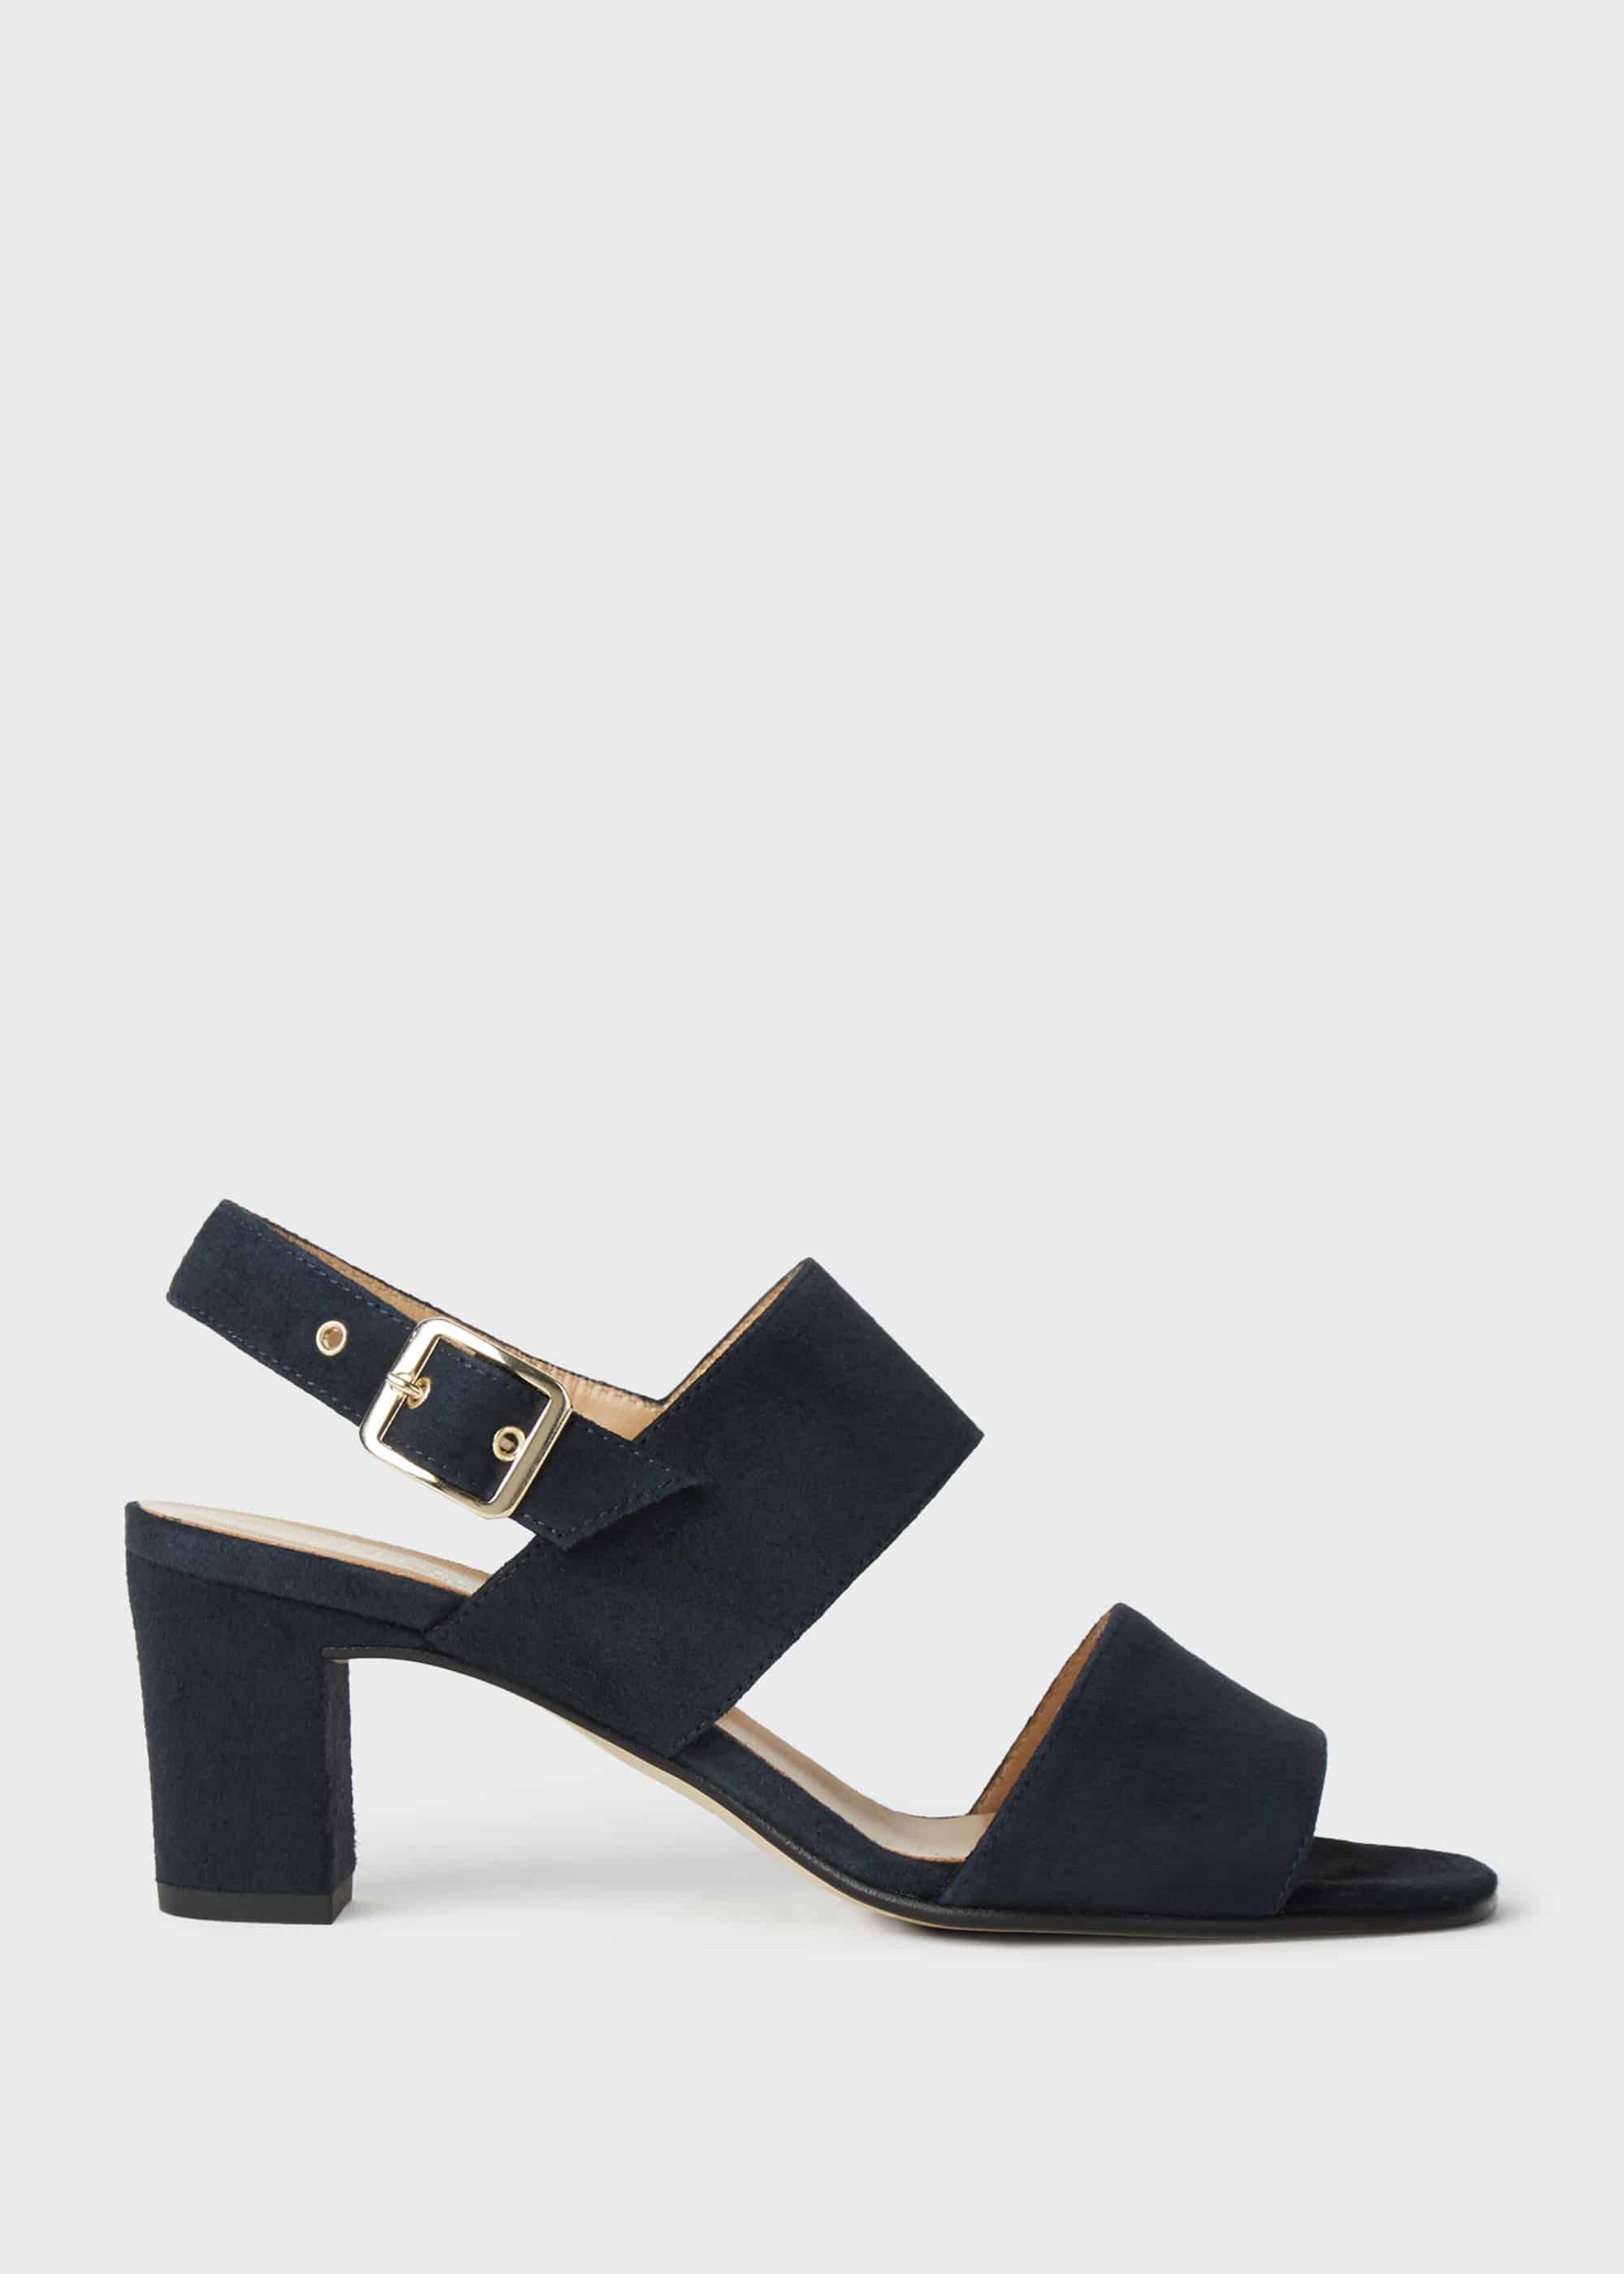 hobbs clearance shoes